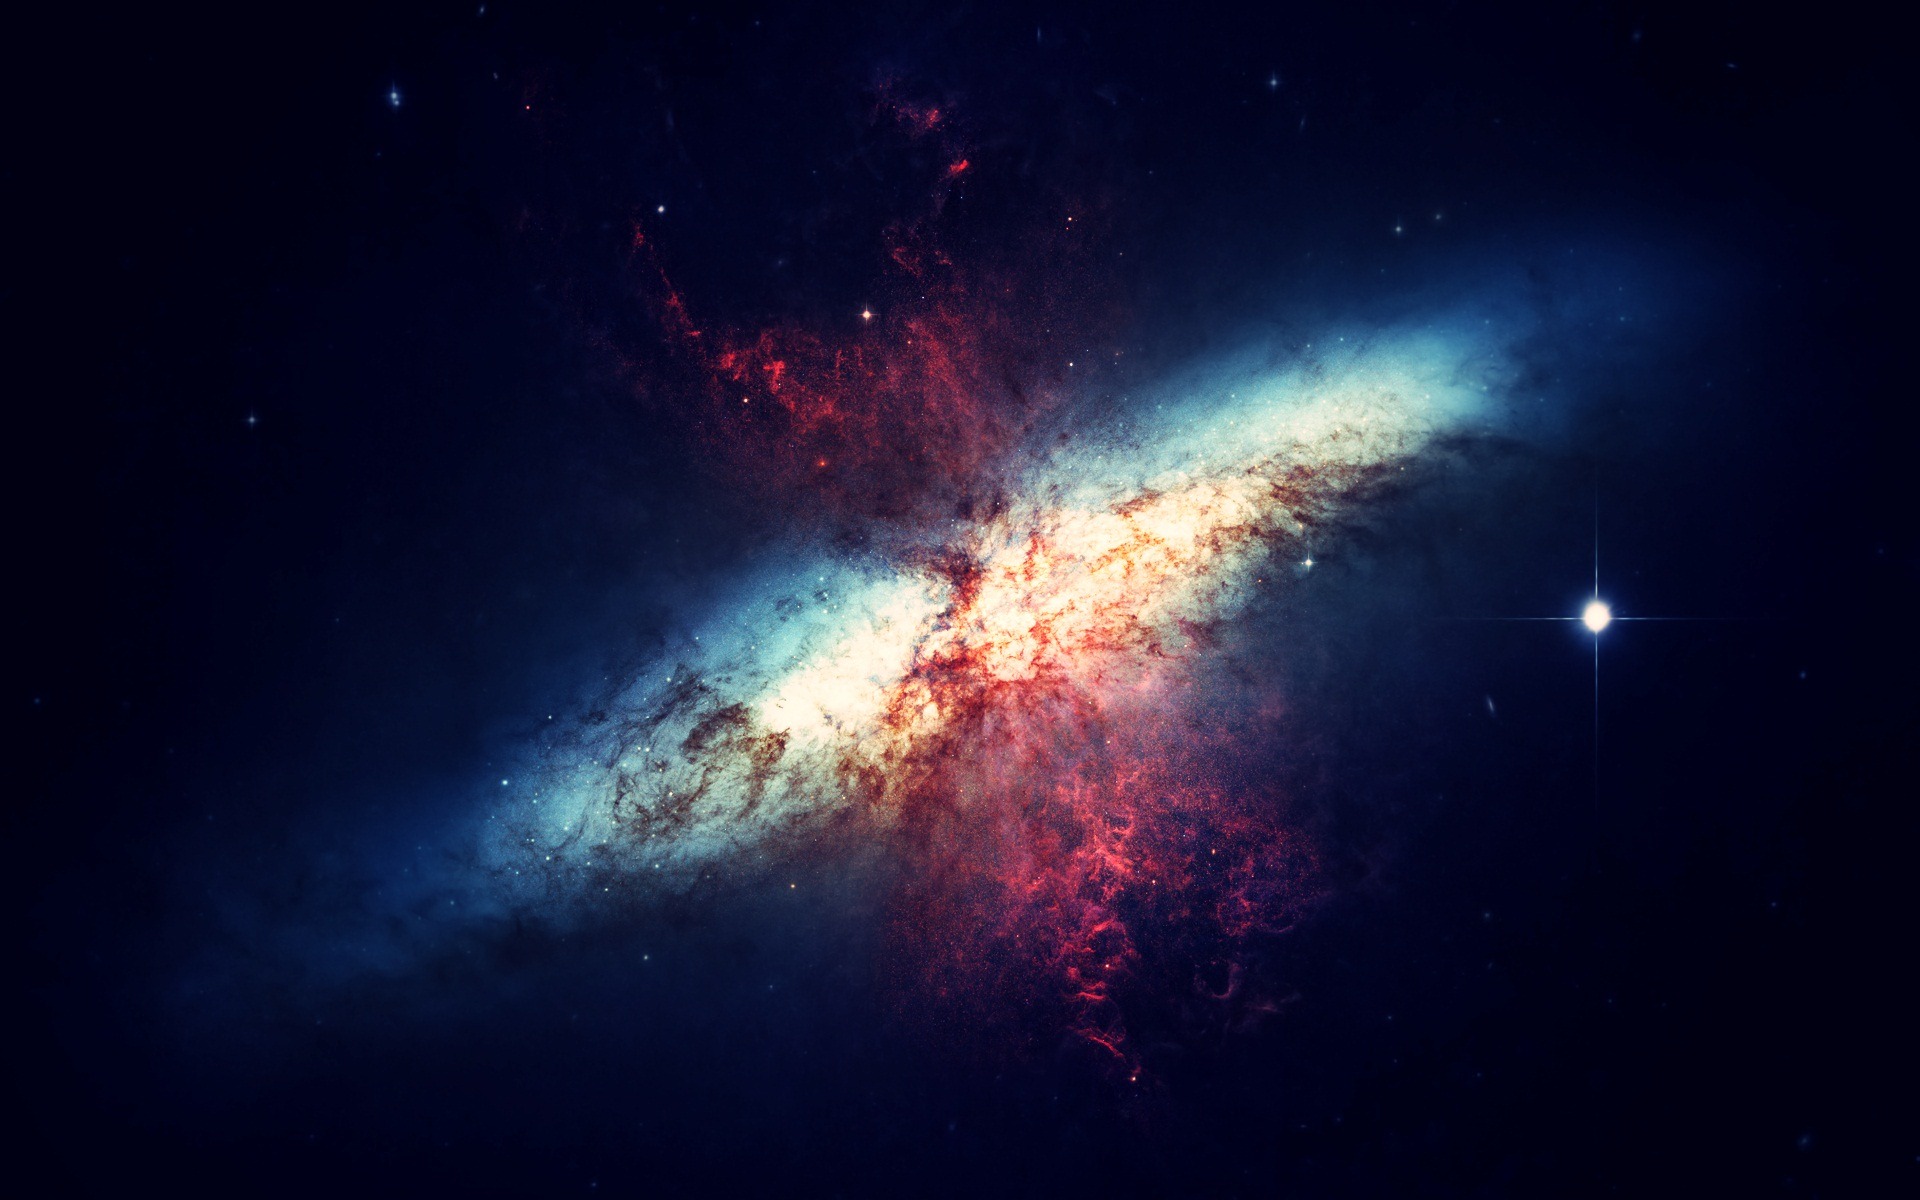 Download hd wallpapers of 272027galaxy Space NASA Free download High  Quality and Widescreen Resoluti  Galaxy wallpaper Cool galaxy wallpapers  Nasa wallpaper